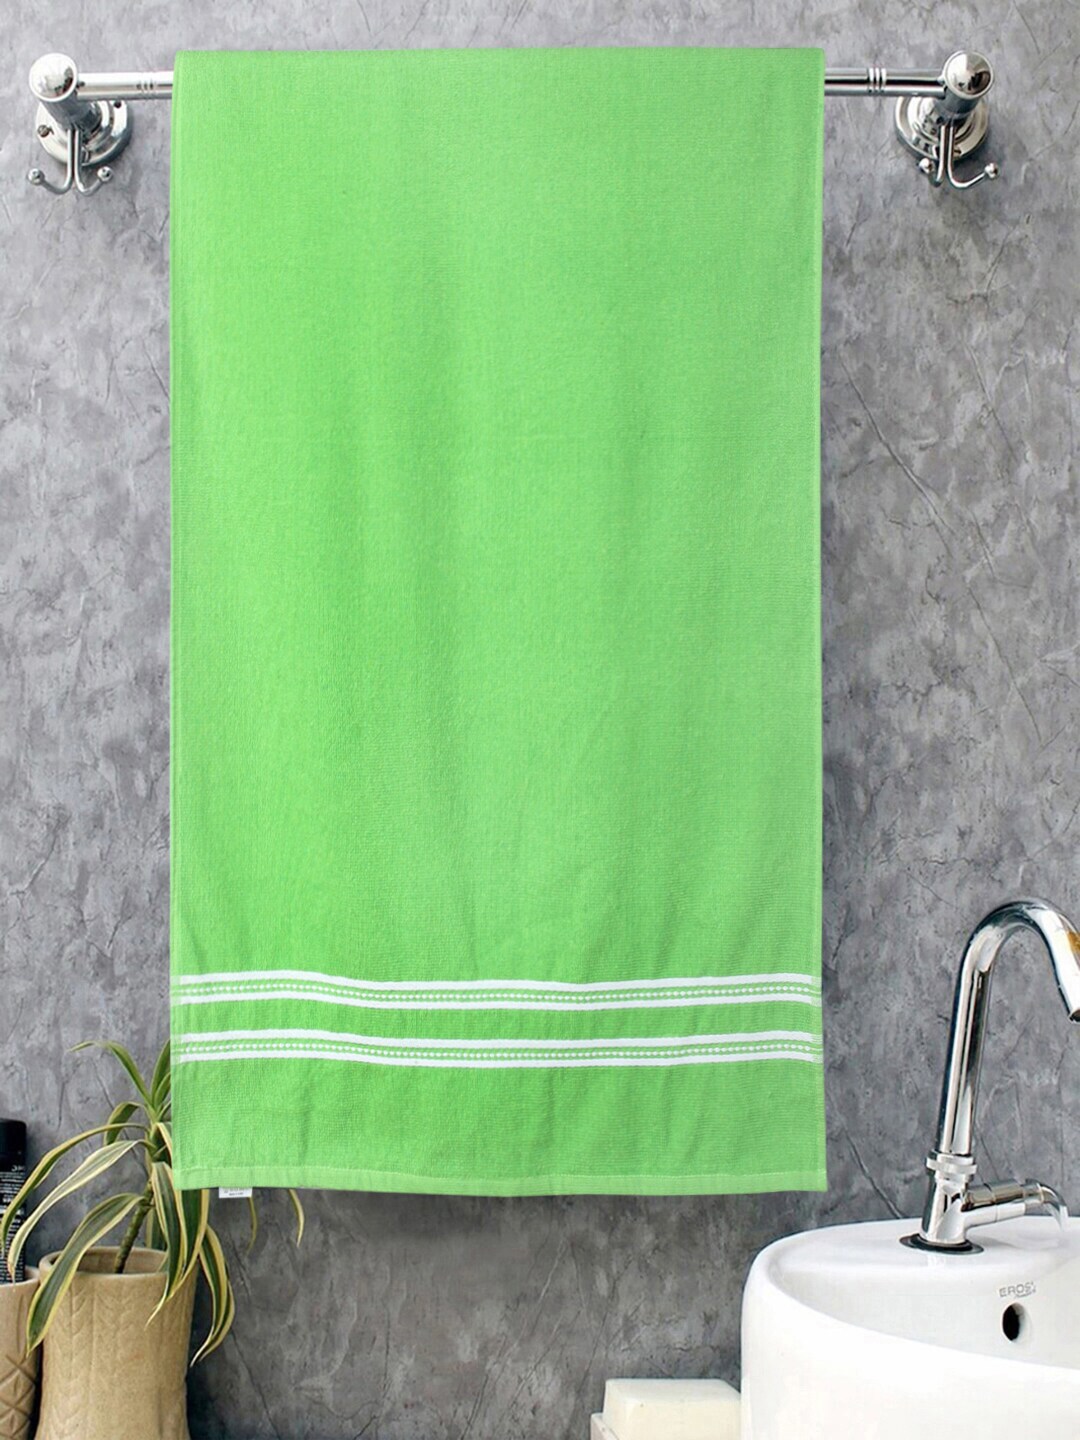 ROMEE Pack Of 2 Green 500 GSM Cotton Bath Towels Price in India